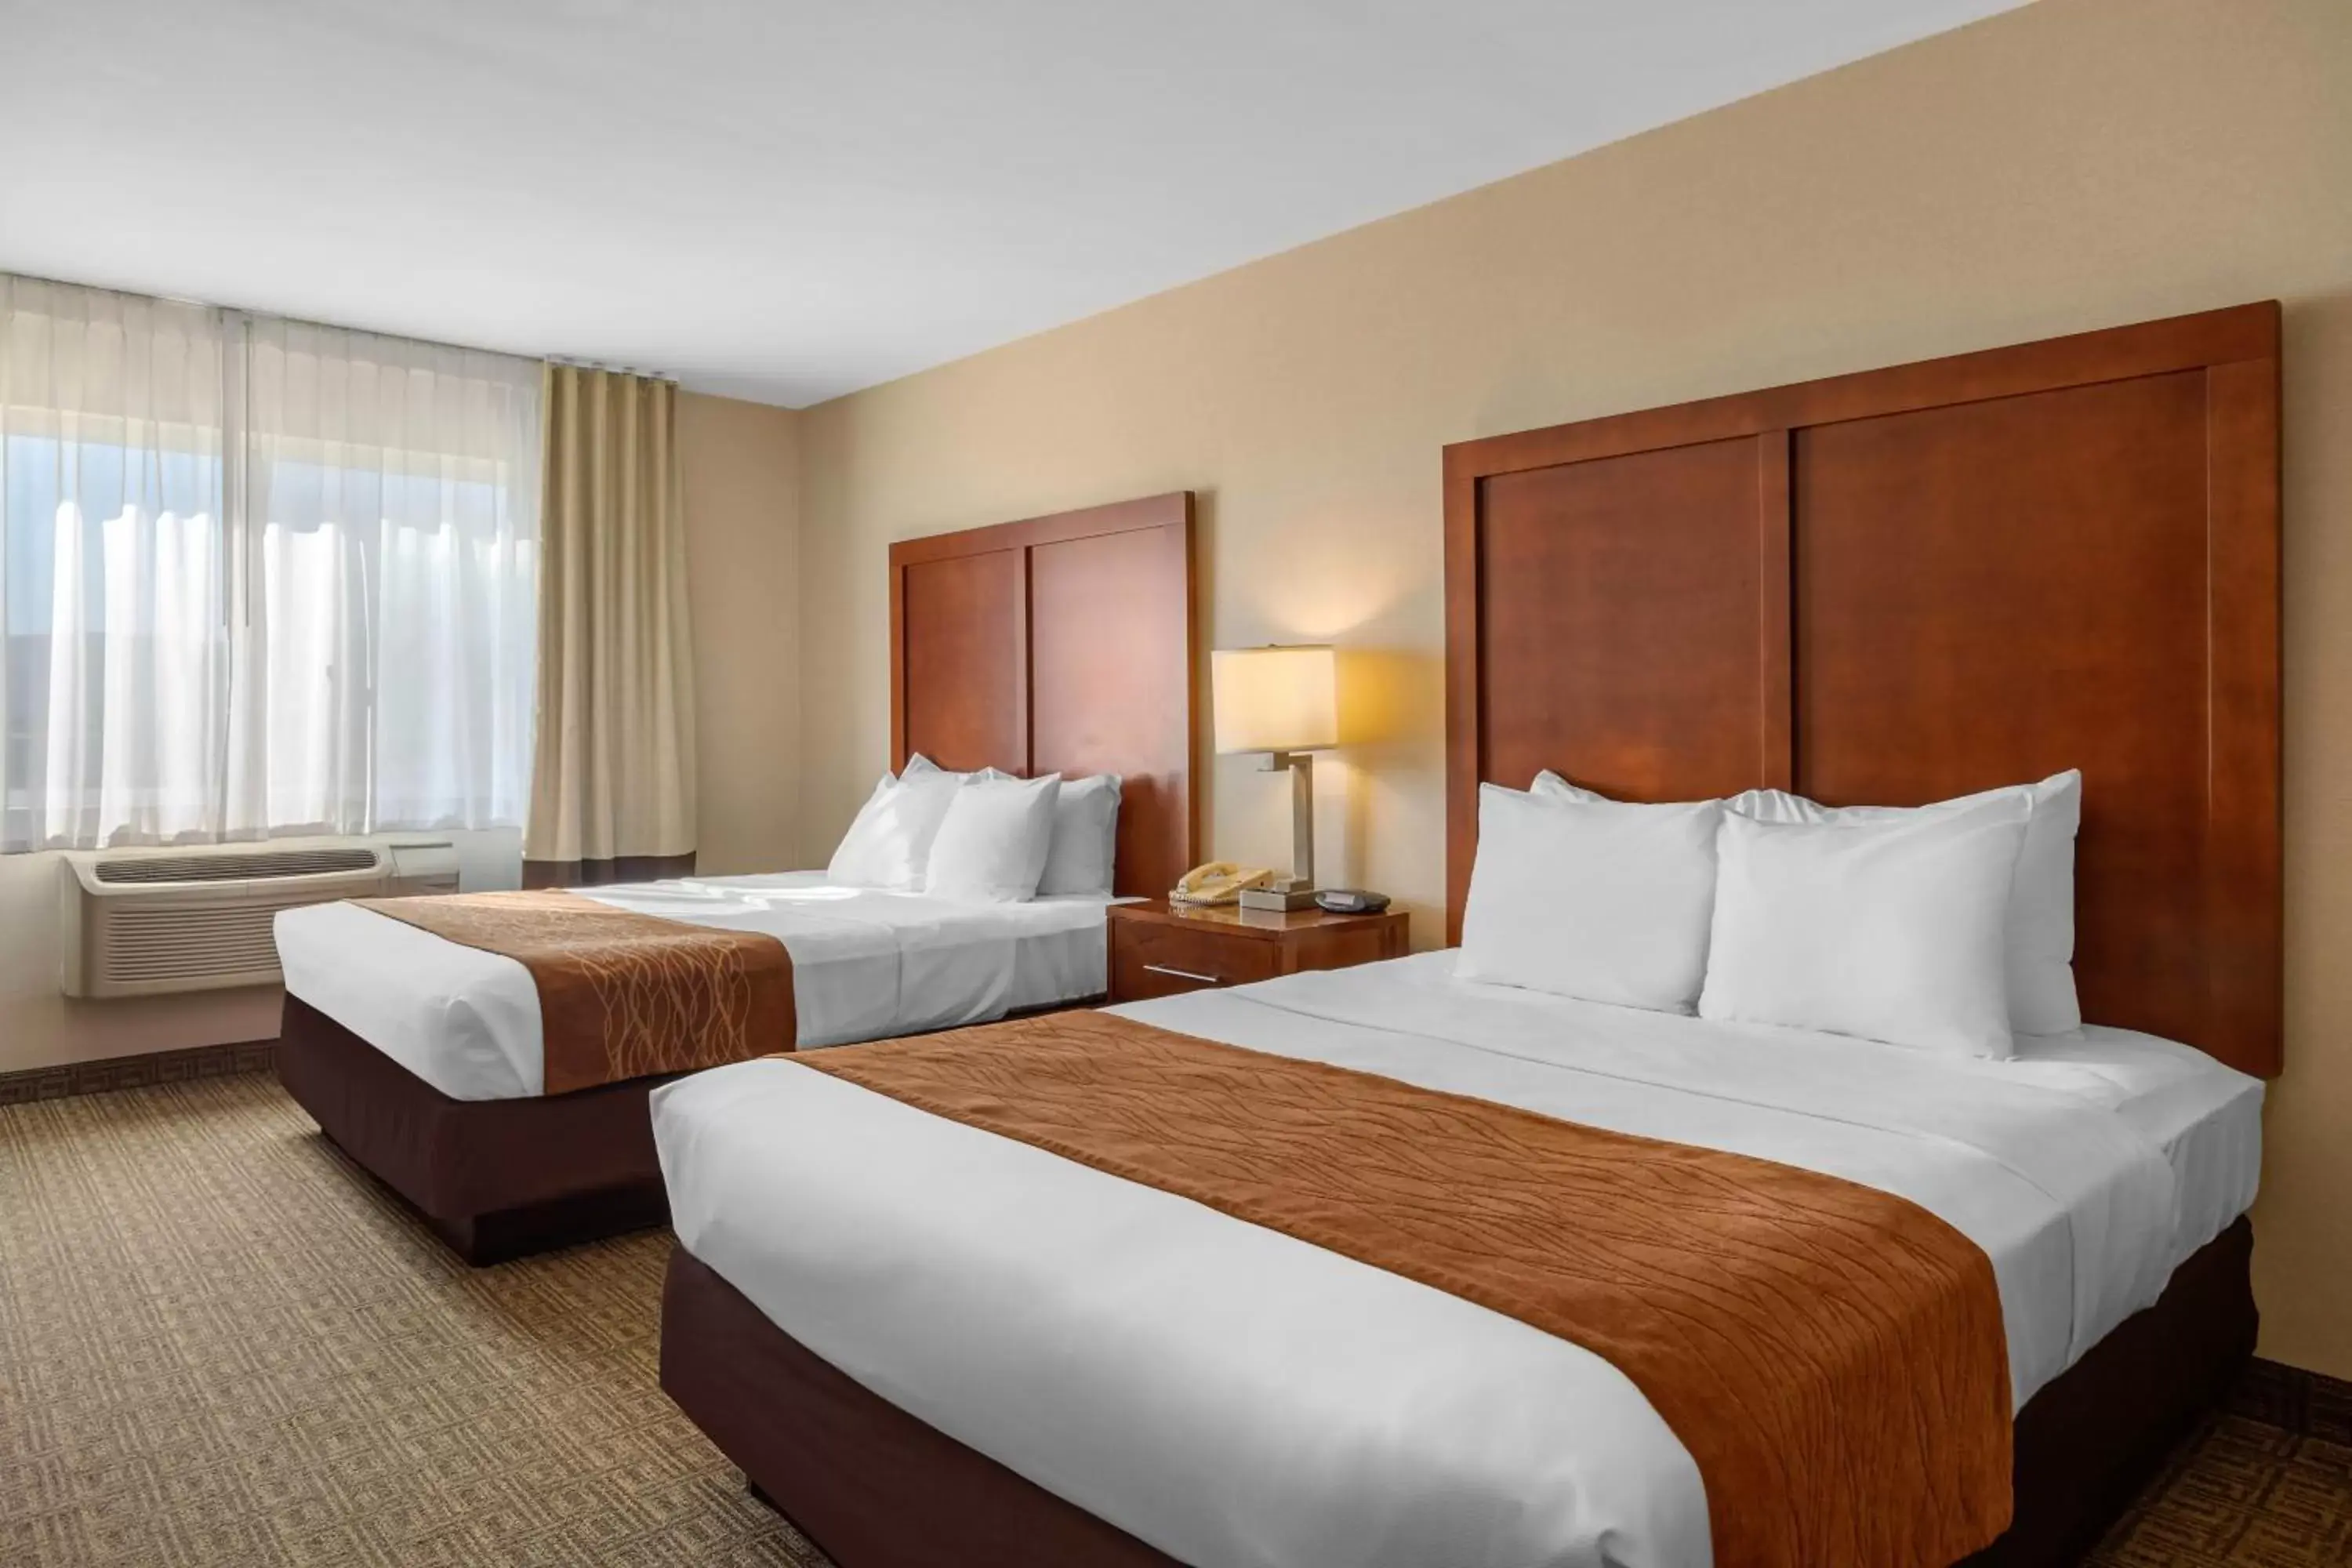 Standard Room, 2 Queen Beds, Accessible Roll-In Shower, Non Smoking in Comfort Inn & Suites Murrieta Temecula Wine Country